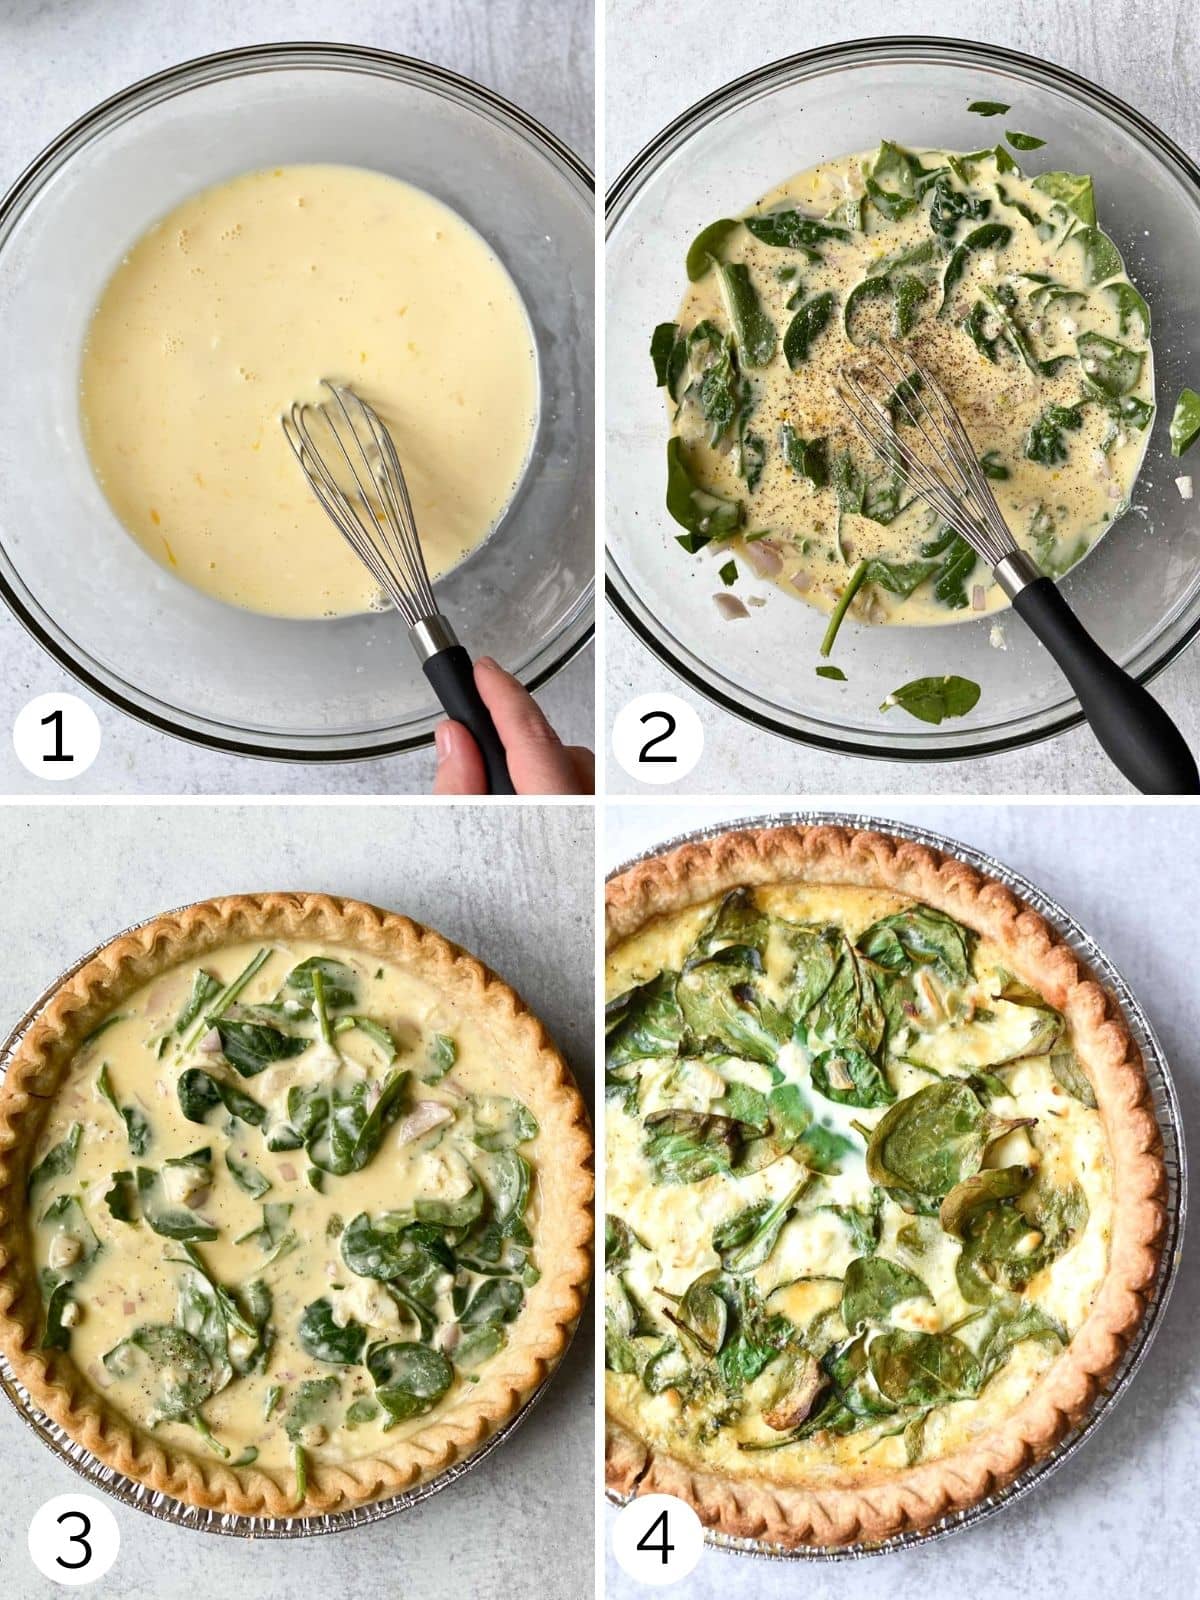 Process photos for making a spinach and cheese quiche.